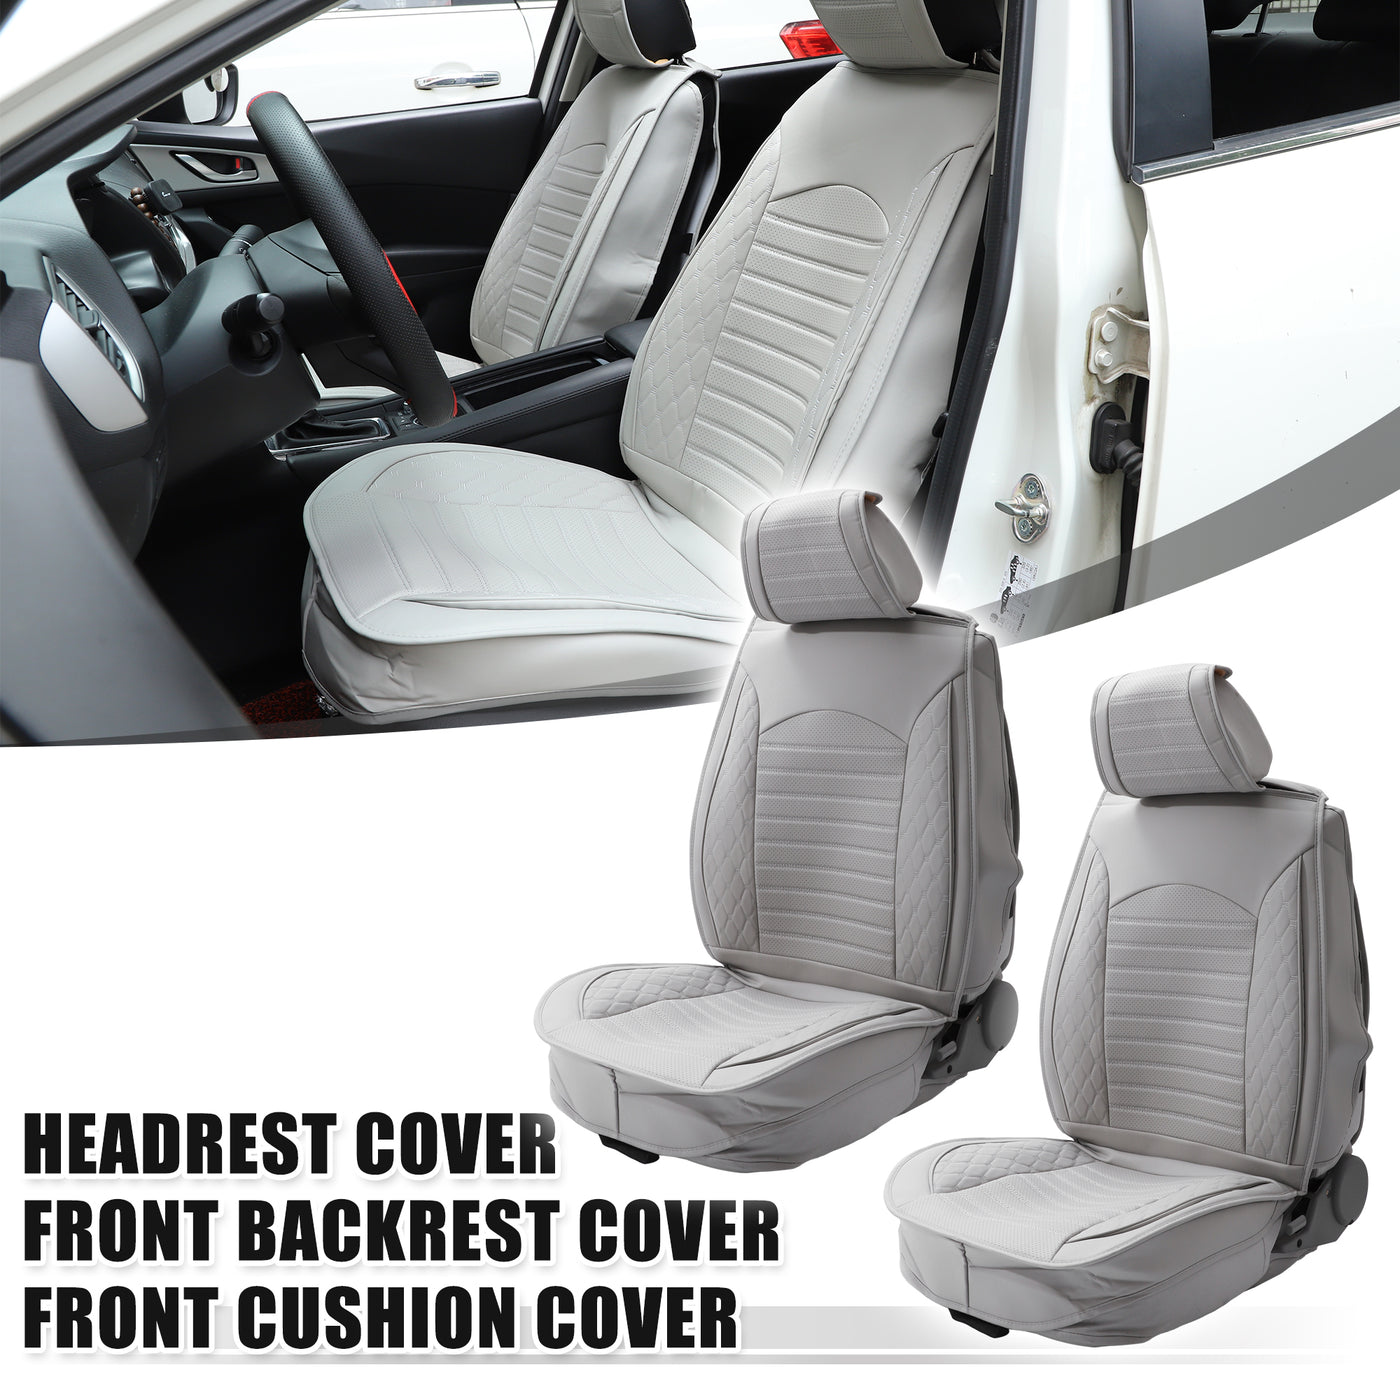 ACROPIX Universal Leather Car Seat Covers Cushion Protectors for Front Seat Car SUV Truck Sedan Vehicle Auto Interior Accessories Waterproof Non-Slip Gray - Pack of 12